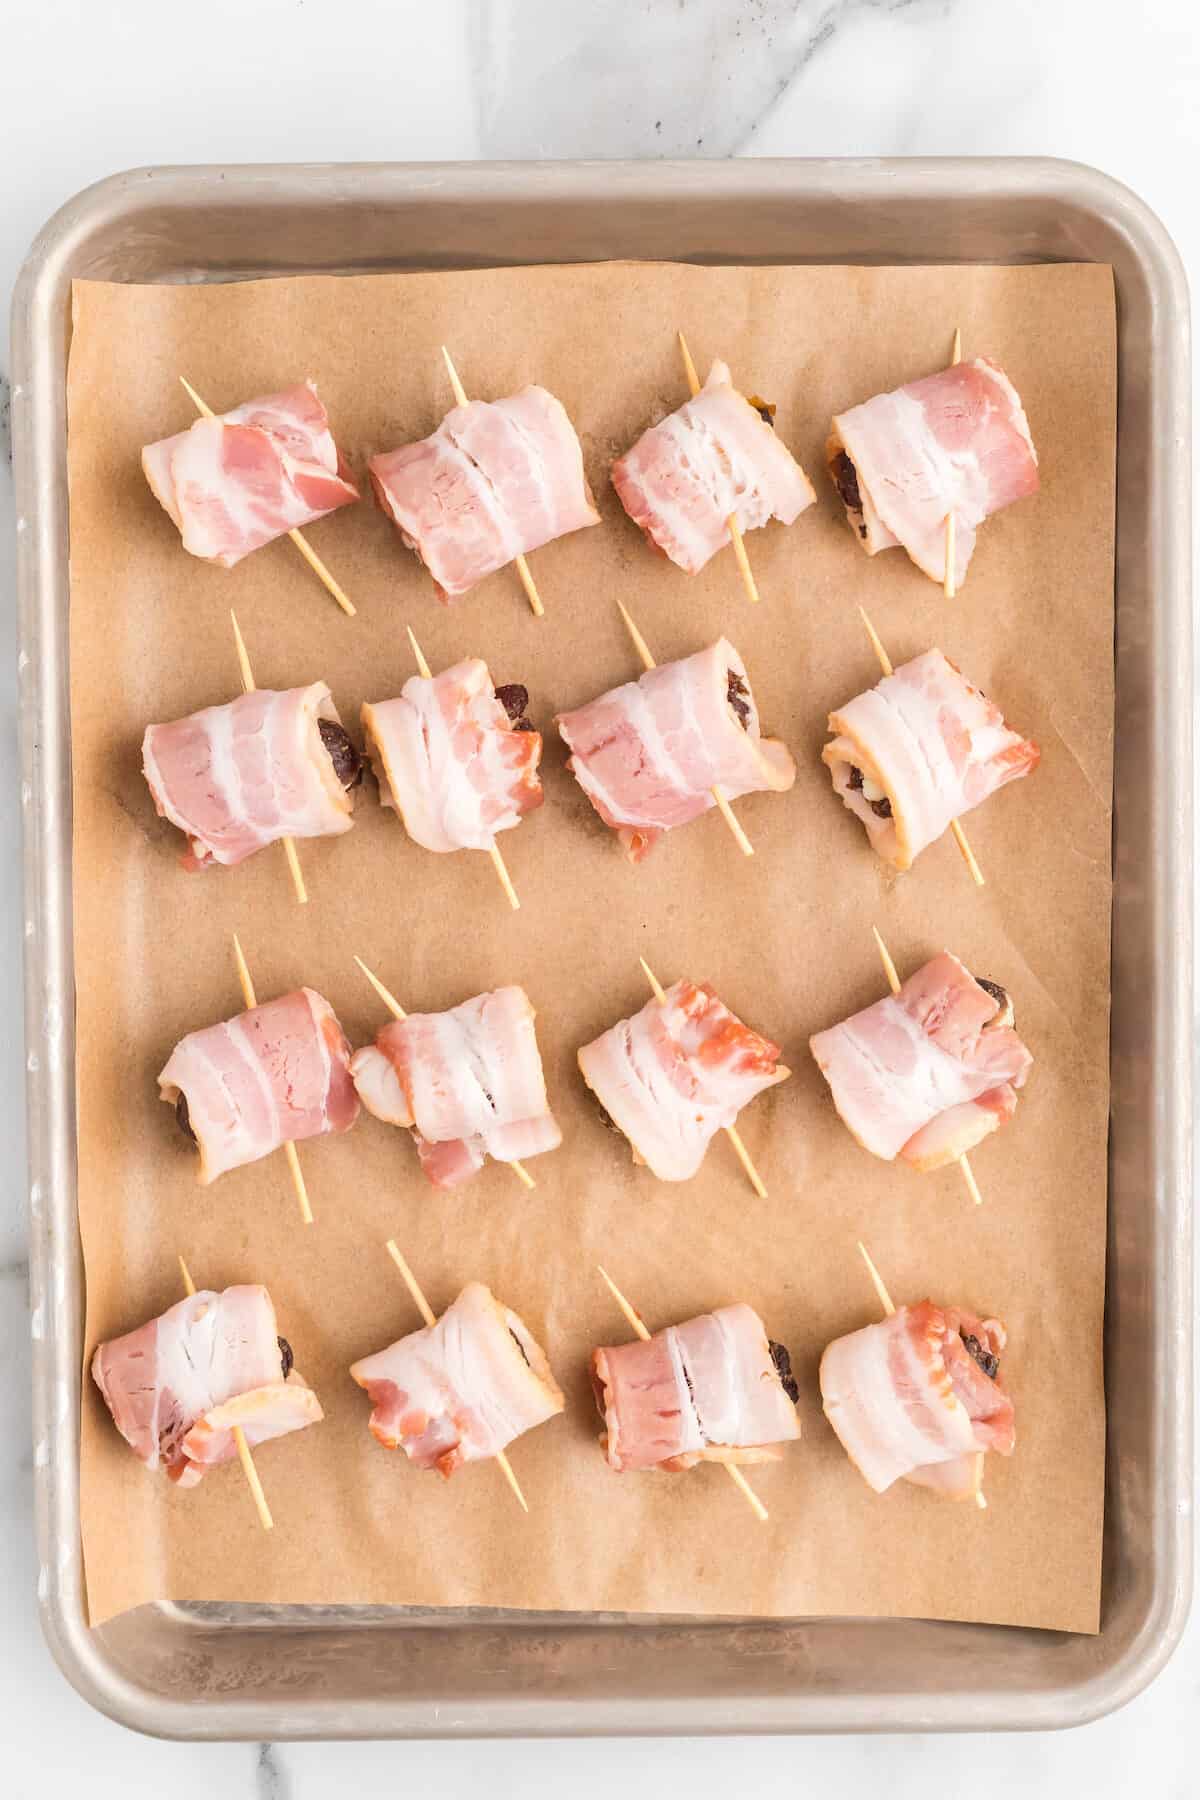 wrapping the cheese stuffed dates with bacon slices and securing with a toothpick.